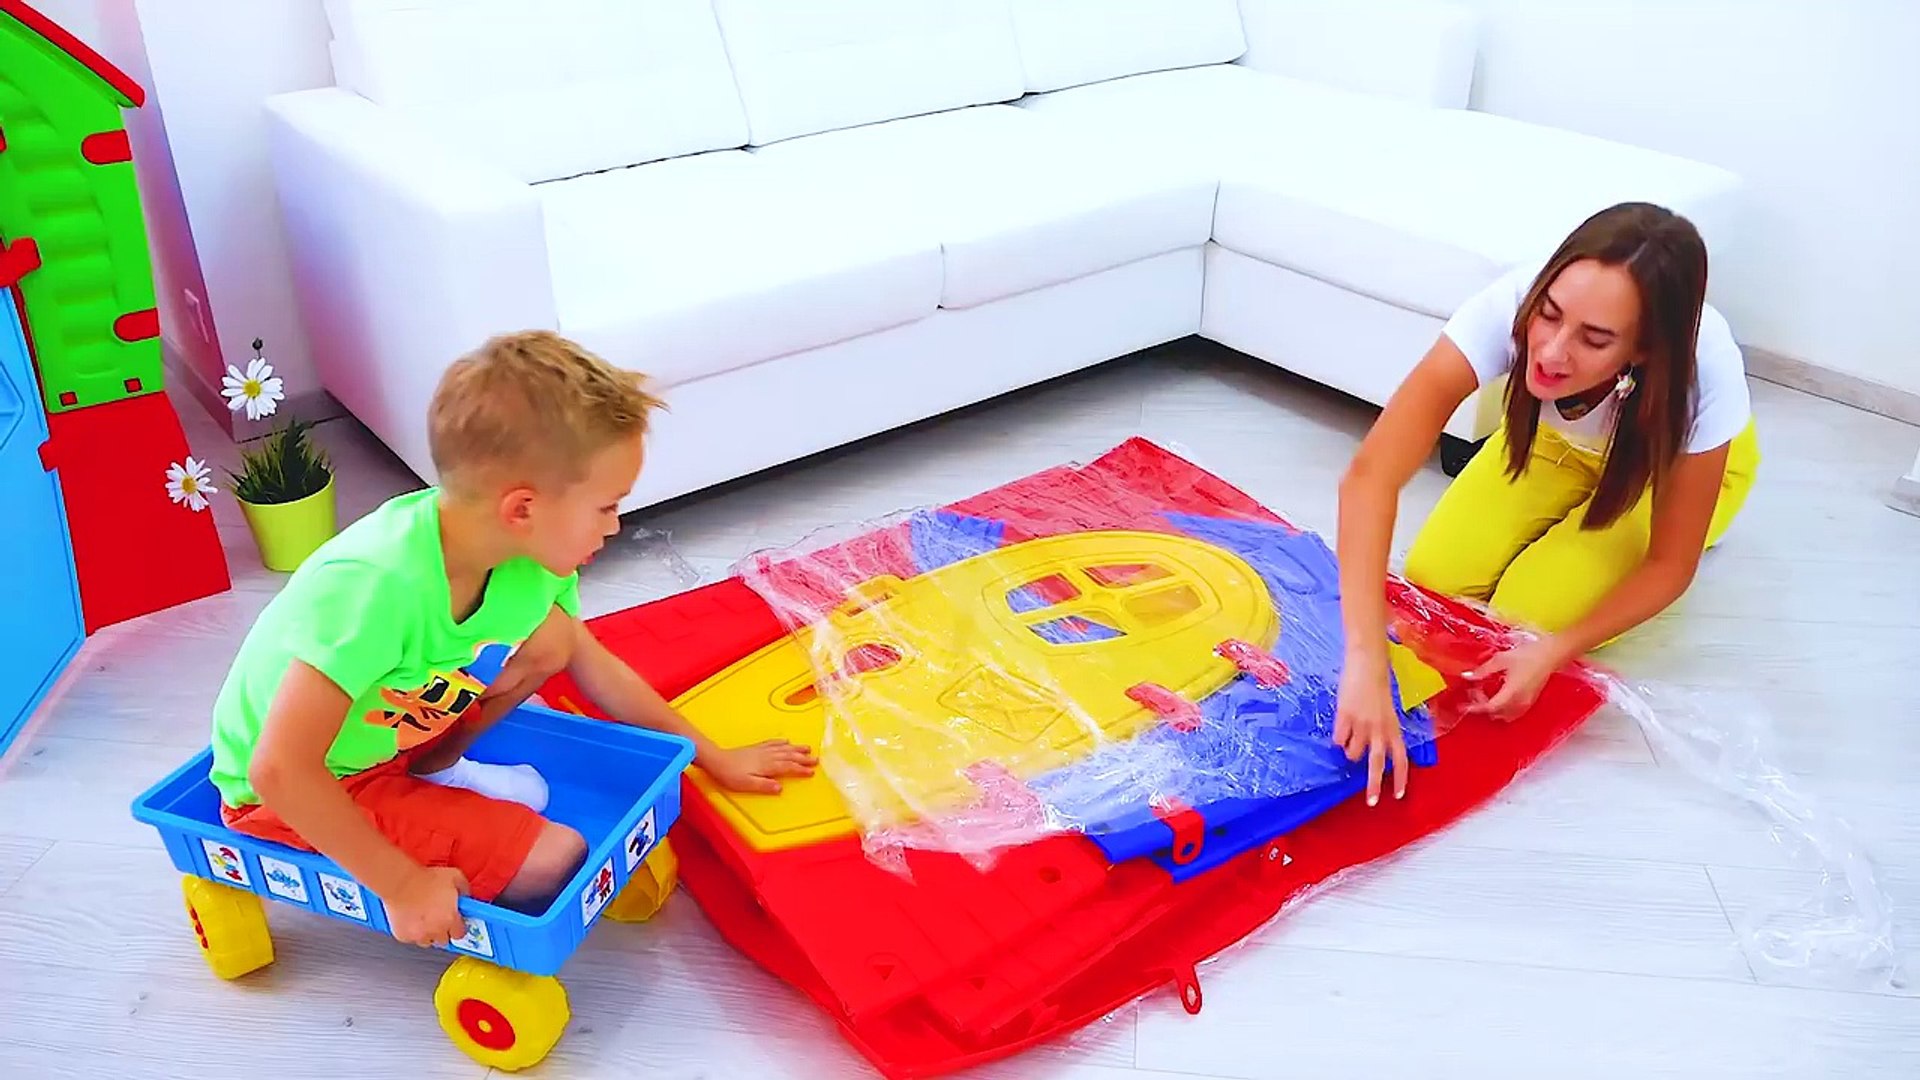 Vlad and Nikita build Playhouses for children - video Dailymotion